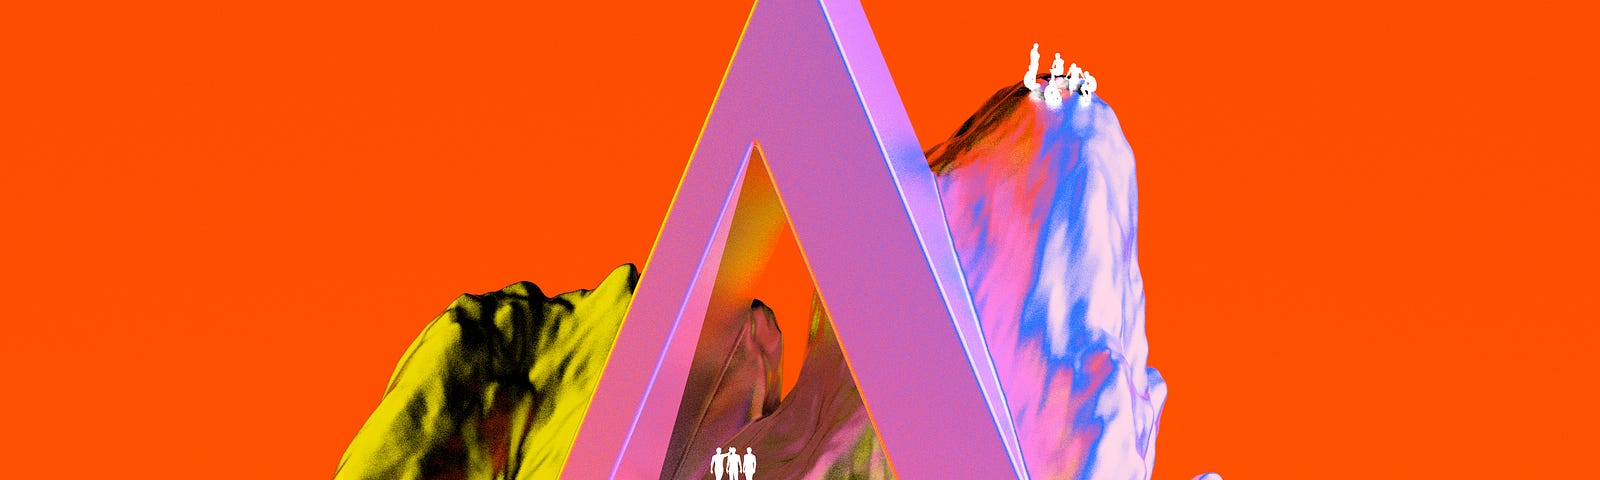 A digital illustration of a lavender uppercase letter A emerging from a mountain of blue, pink, yellow, and black against an orange background. White silhouettes of people are at the base and summit of the mountain, and the crossbar of the letter A.